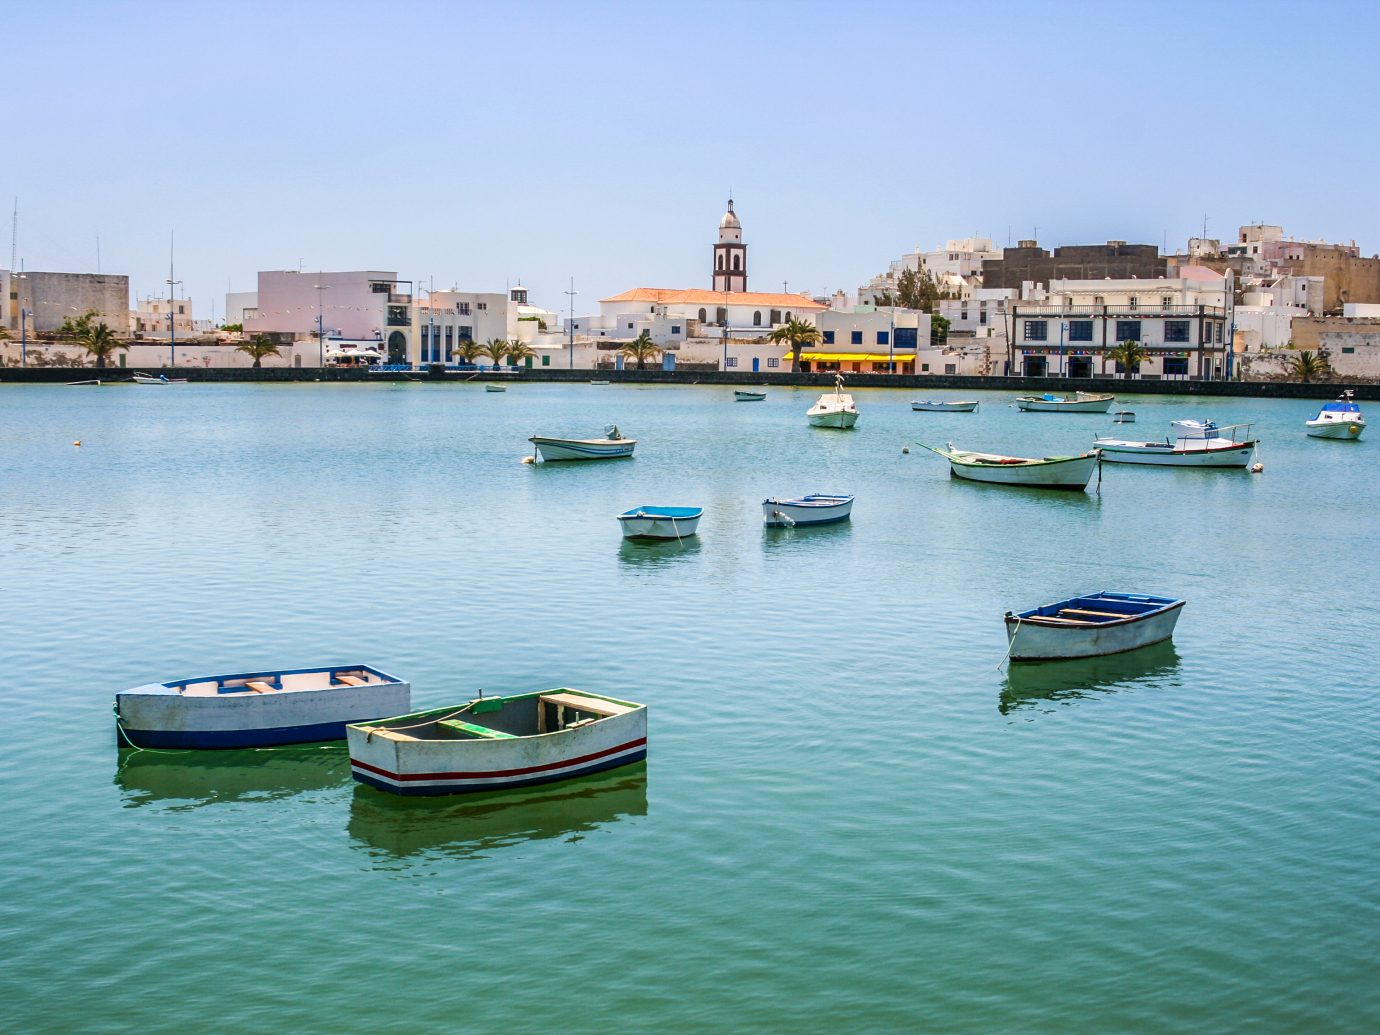 Charco de San Gines on midday in Arrecife, Spain